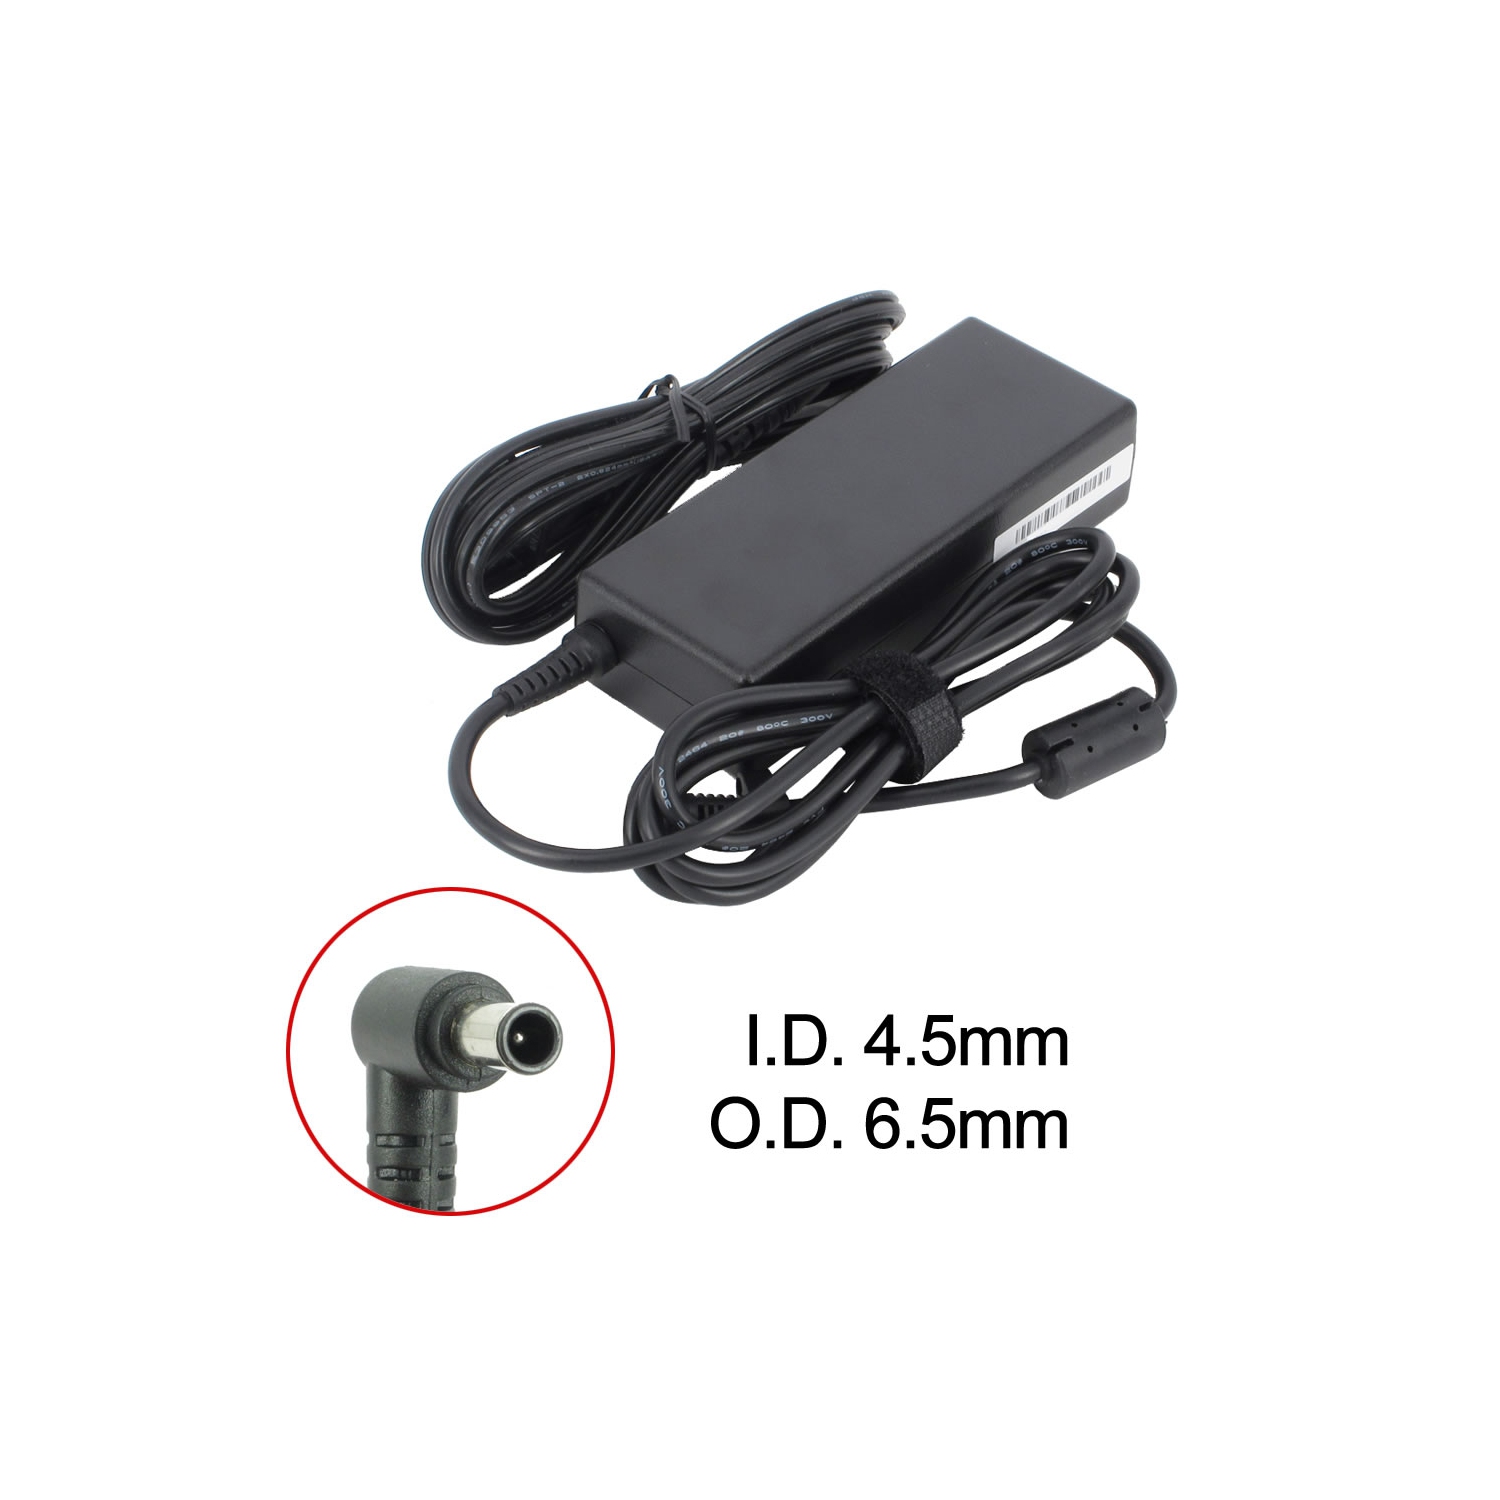 Brand New Laptop AC Adapter for LG XNOTE AD520, ADP-90TH A, PCGA-AC19V19, VGP-AC19V14, VGP-AC19V26, VGP-AC19V43